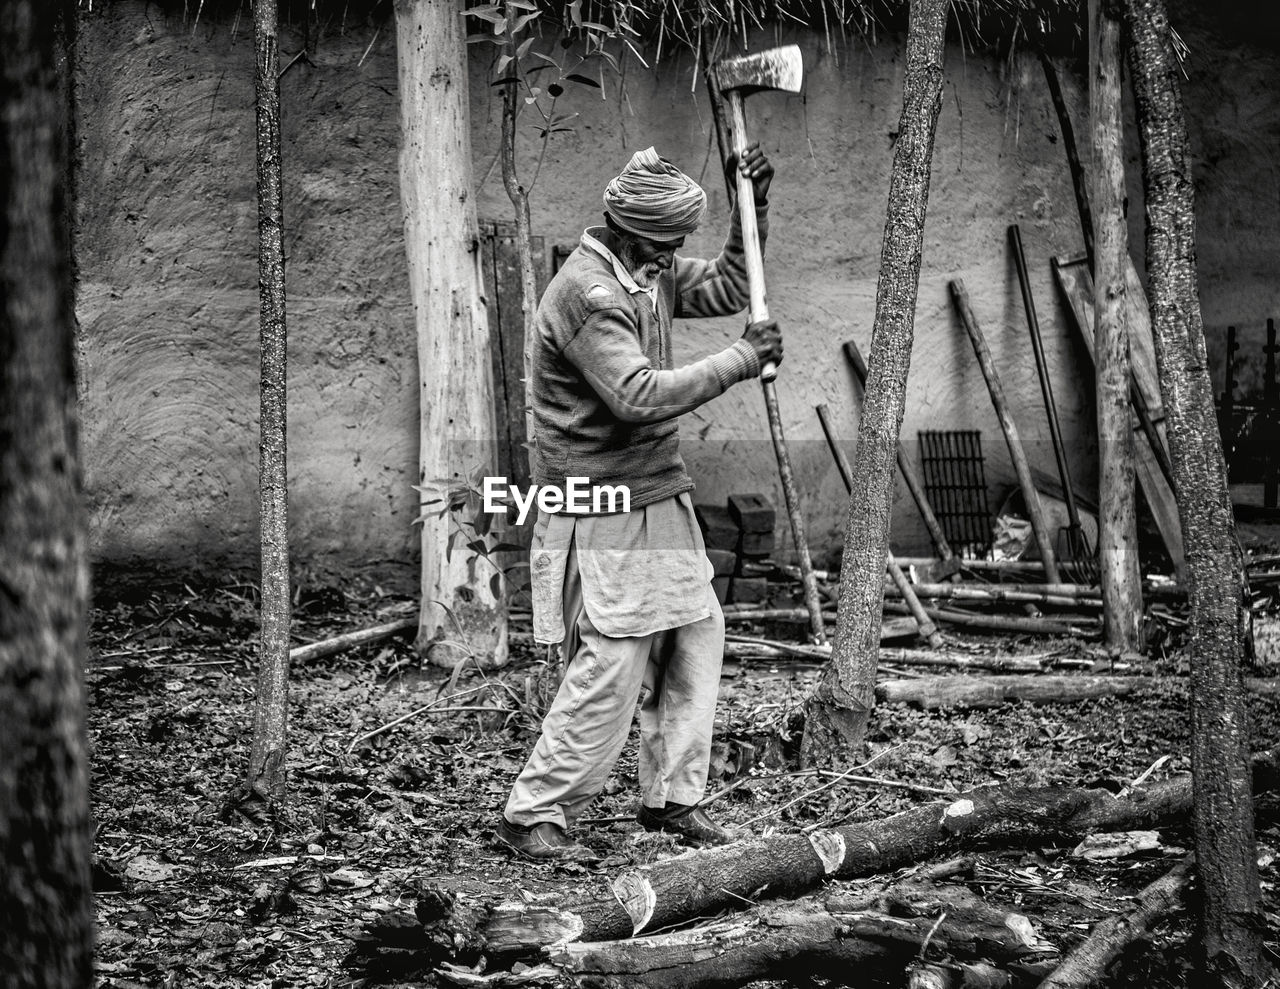 black and white, one person, men, full length, occupation, monochrome, adult, monochrome photography, working, standing, forest, land, nature, plant, tree, day, holding, lifestyles, outdoors, casual clothing, manual worker, protection, wood, weapon, person, tree trunk